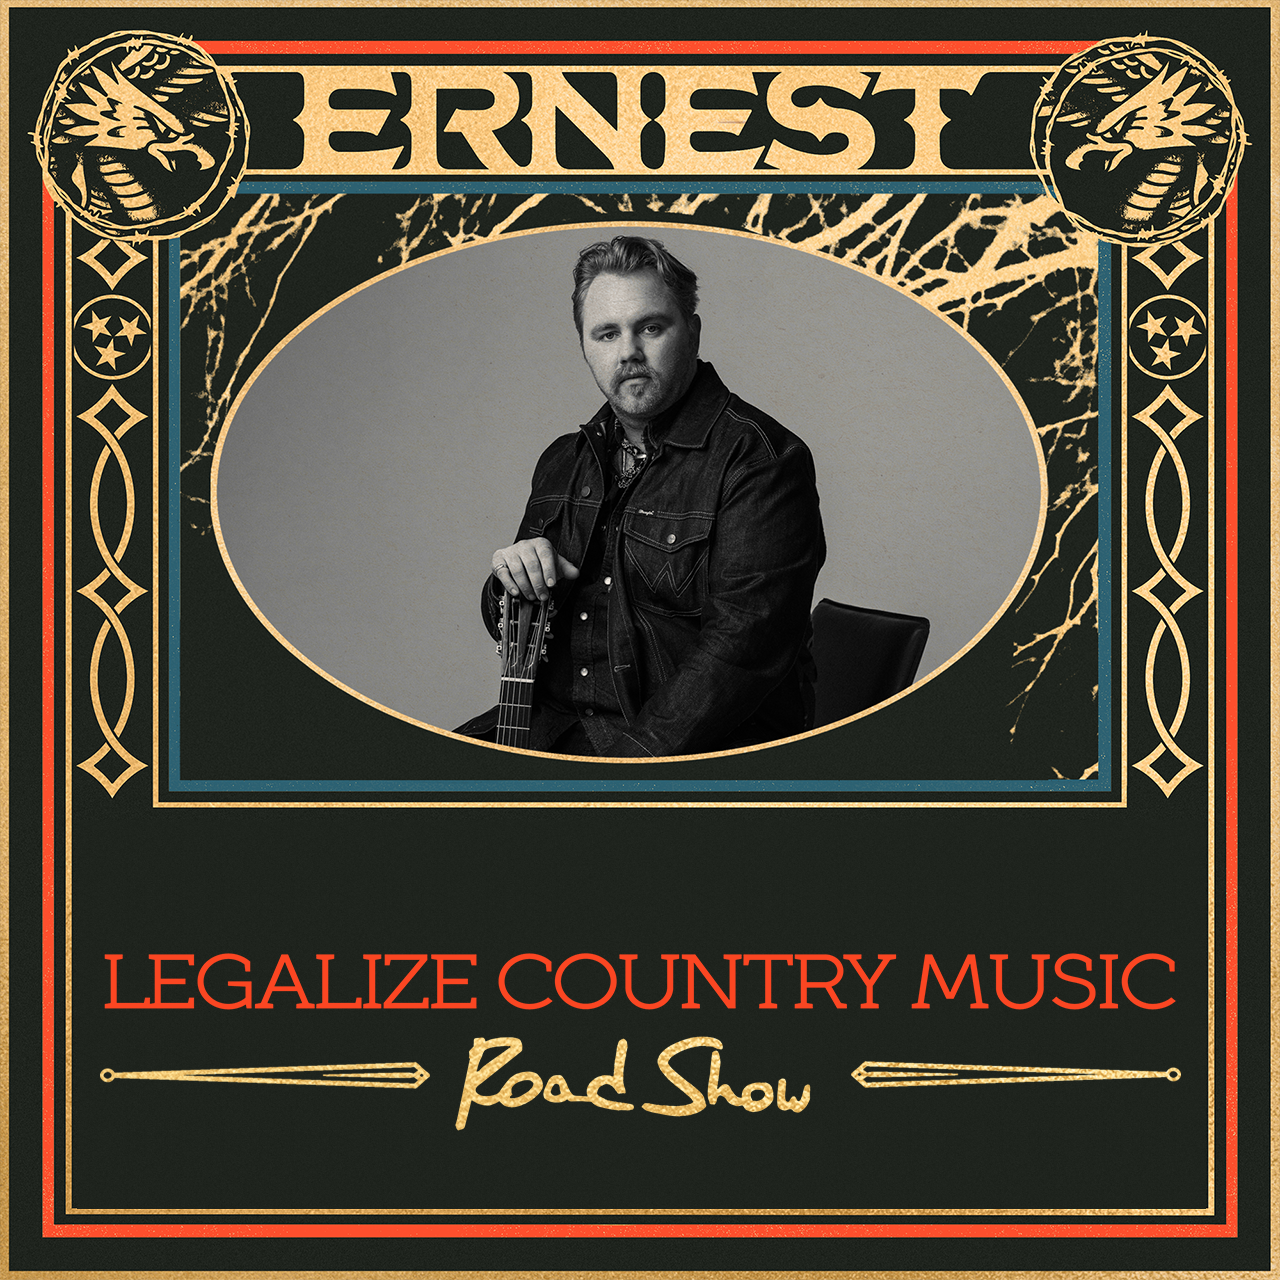 Legalize Country Music Roadshow